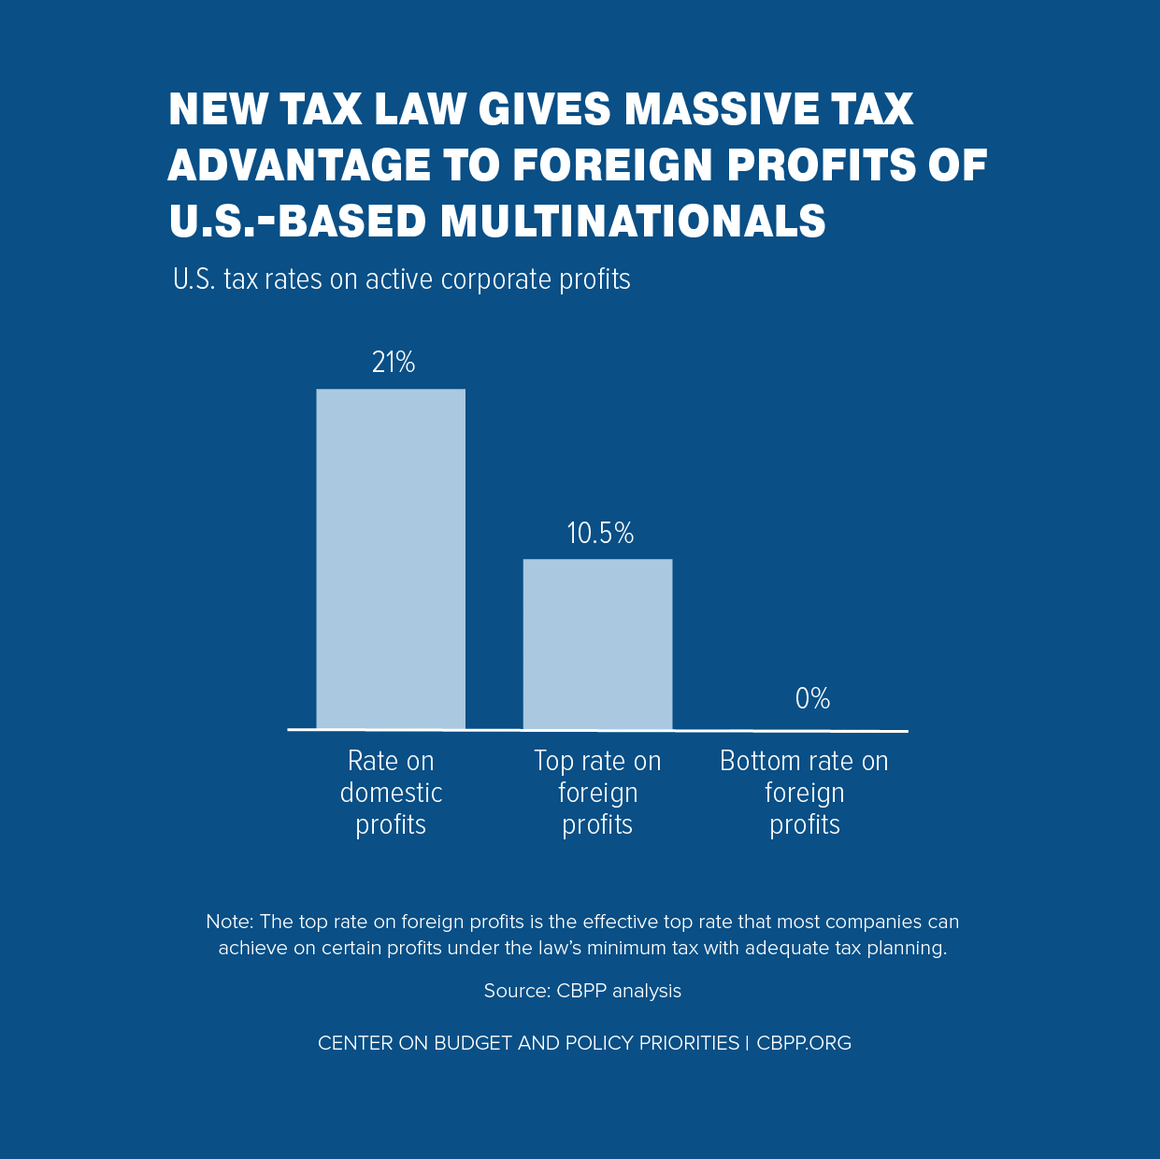 New Tax Law Gives Massive Tax Advantage to Foreign Profits of U.S.-Based Mulitnationals